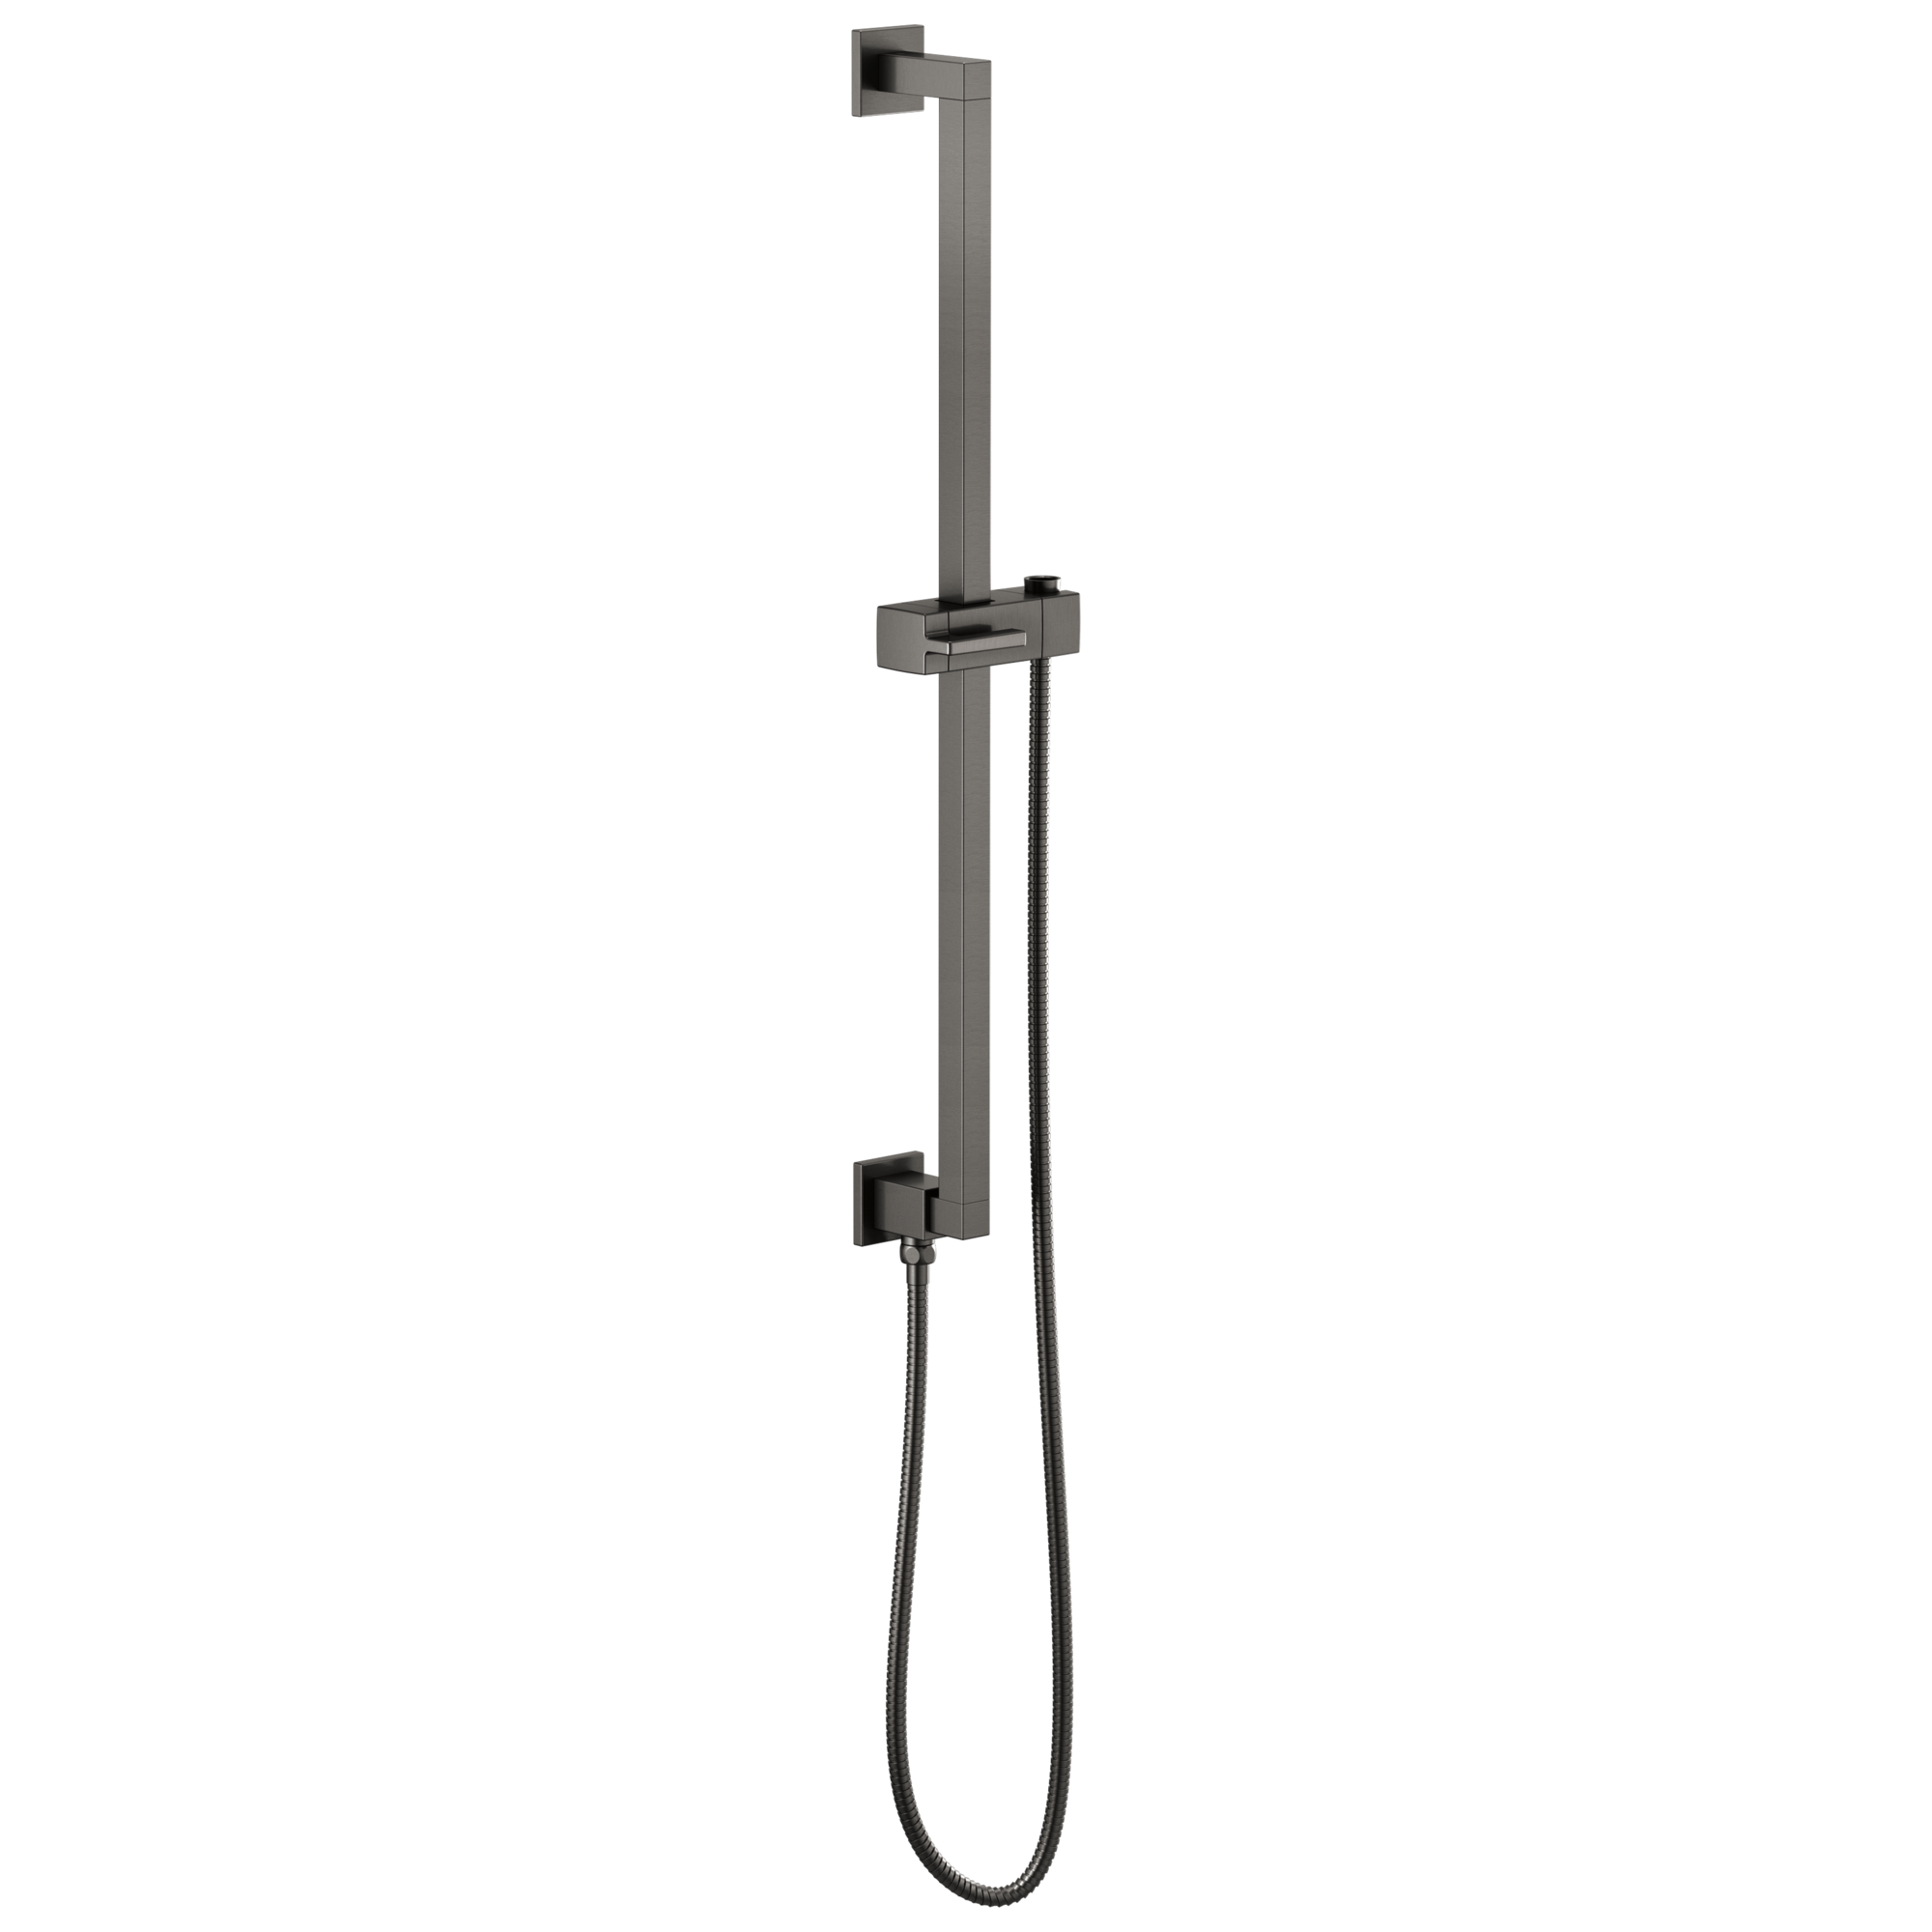 Brizo Universal Showering Linear Square Slide Bar With Hose